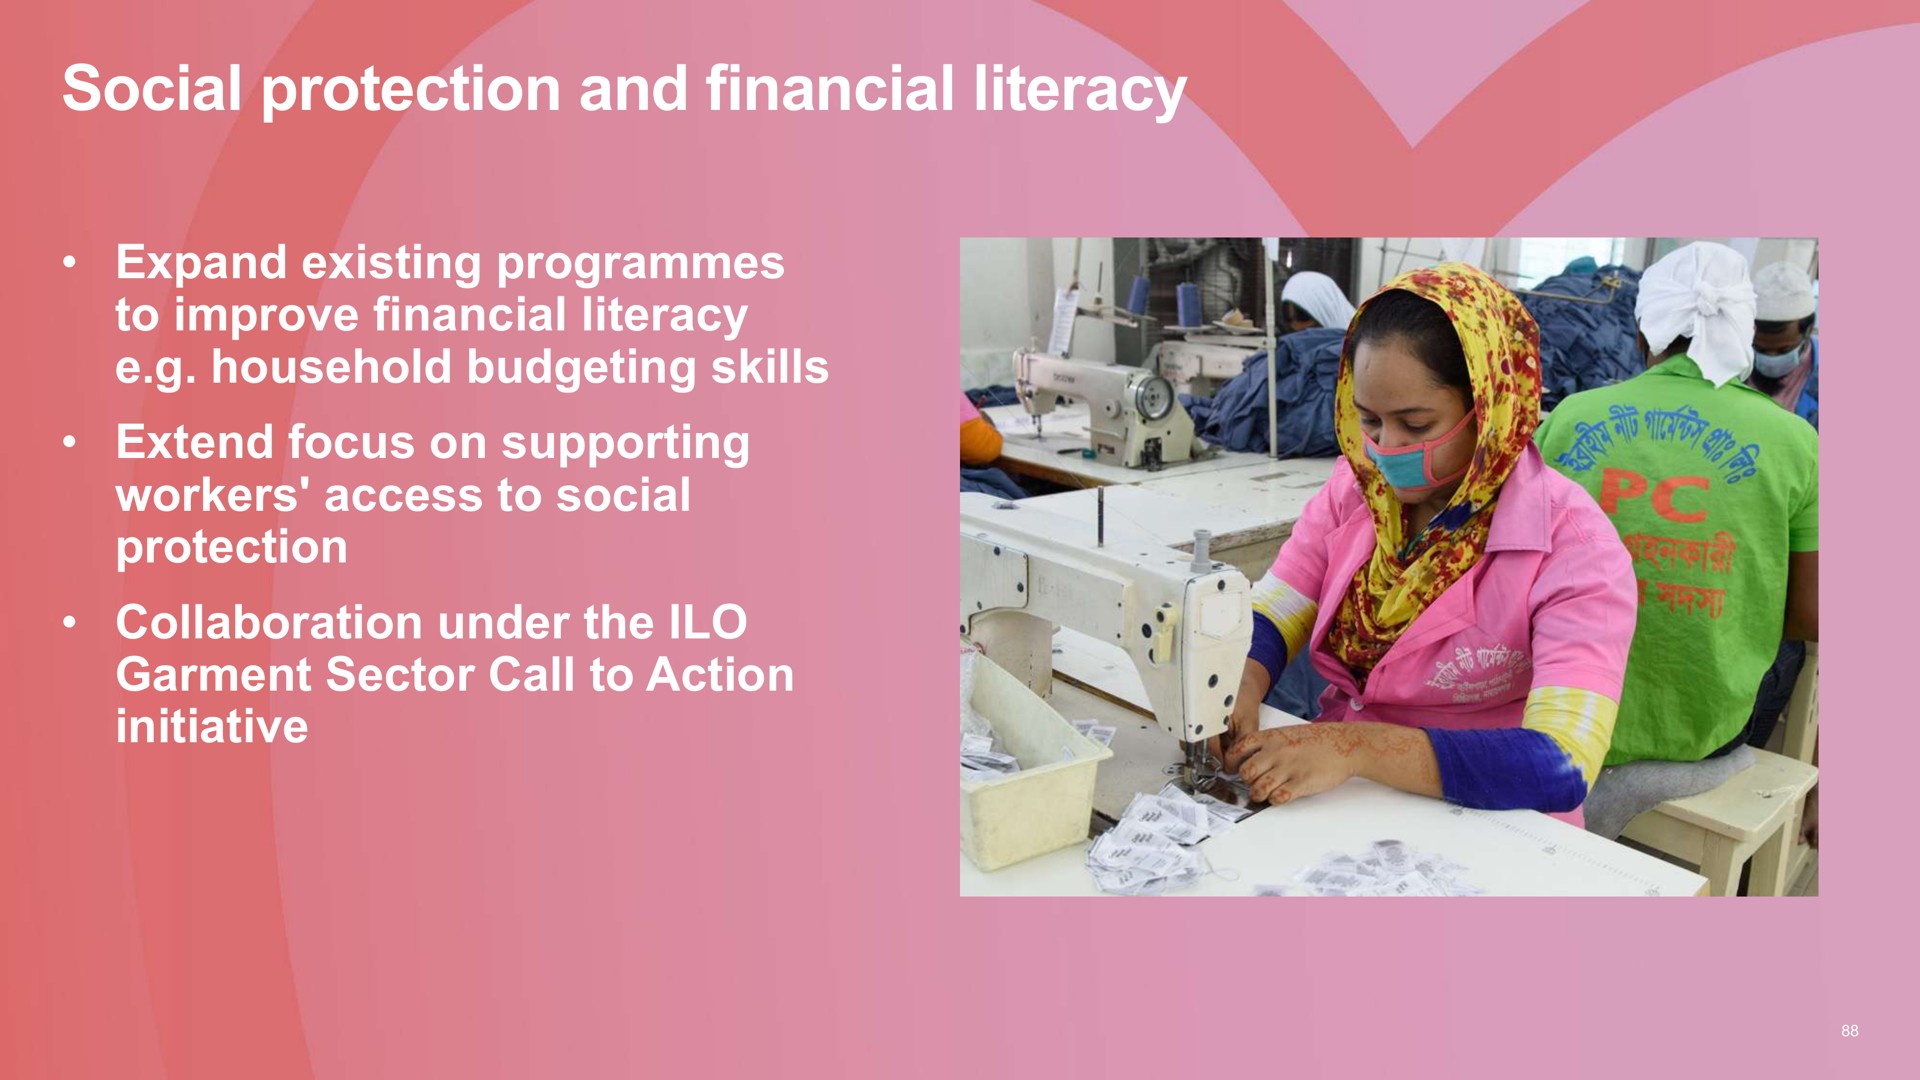 social protection and financial literacy | Associated British Foods